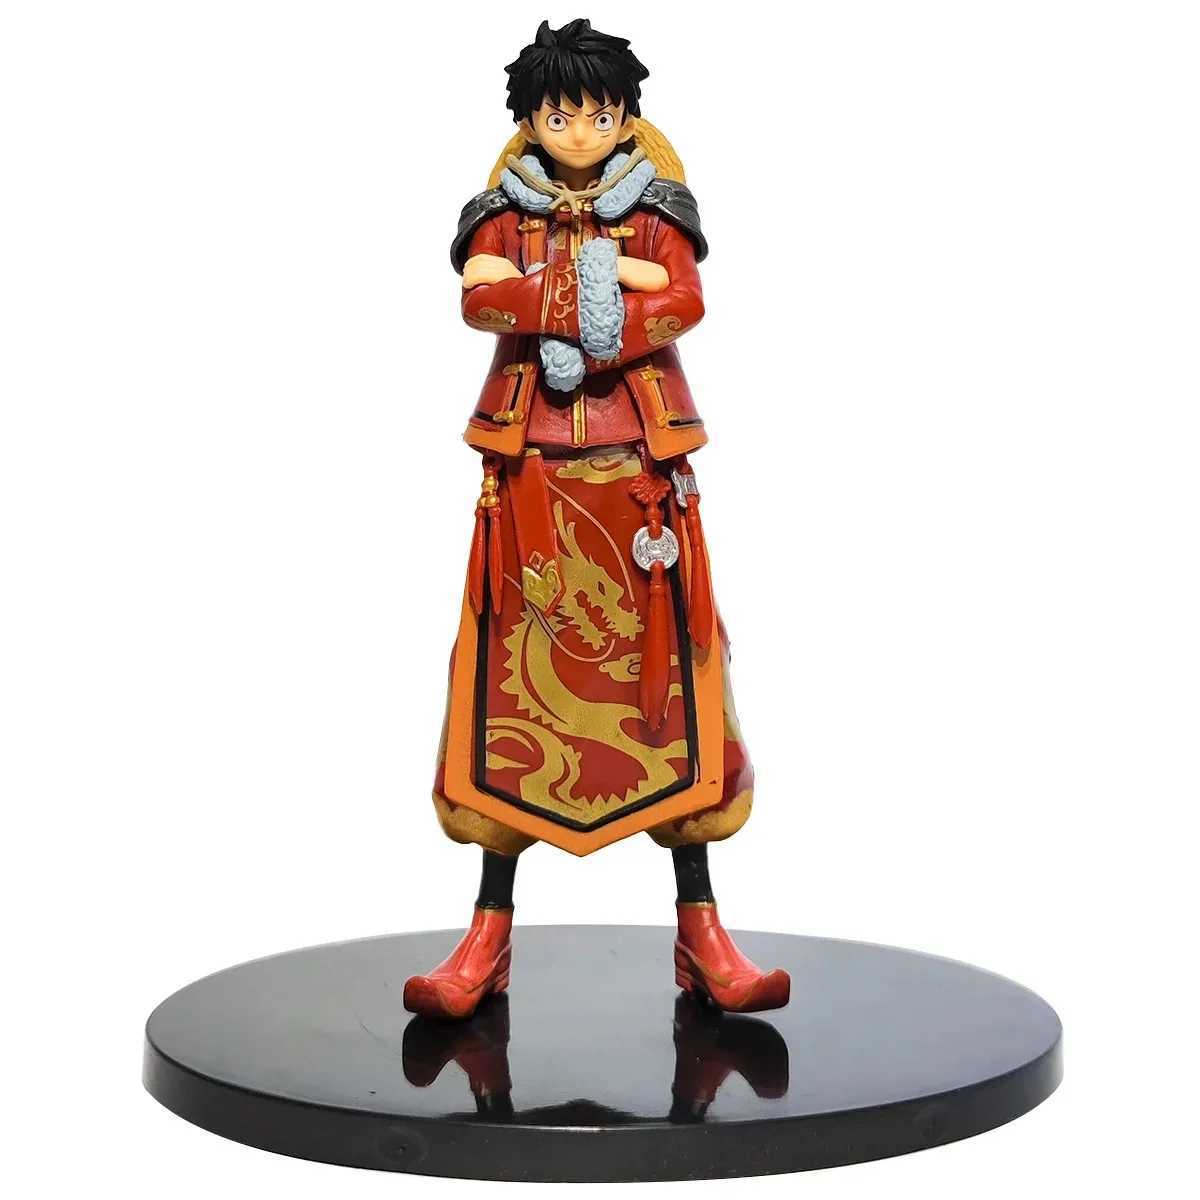 Comics Heroes Anime One Piece Figure Zoro Luffy PVC Statue Action Action Figure Duffy Chinese Style Model Toy For Kids Christmas Gift 240413